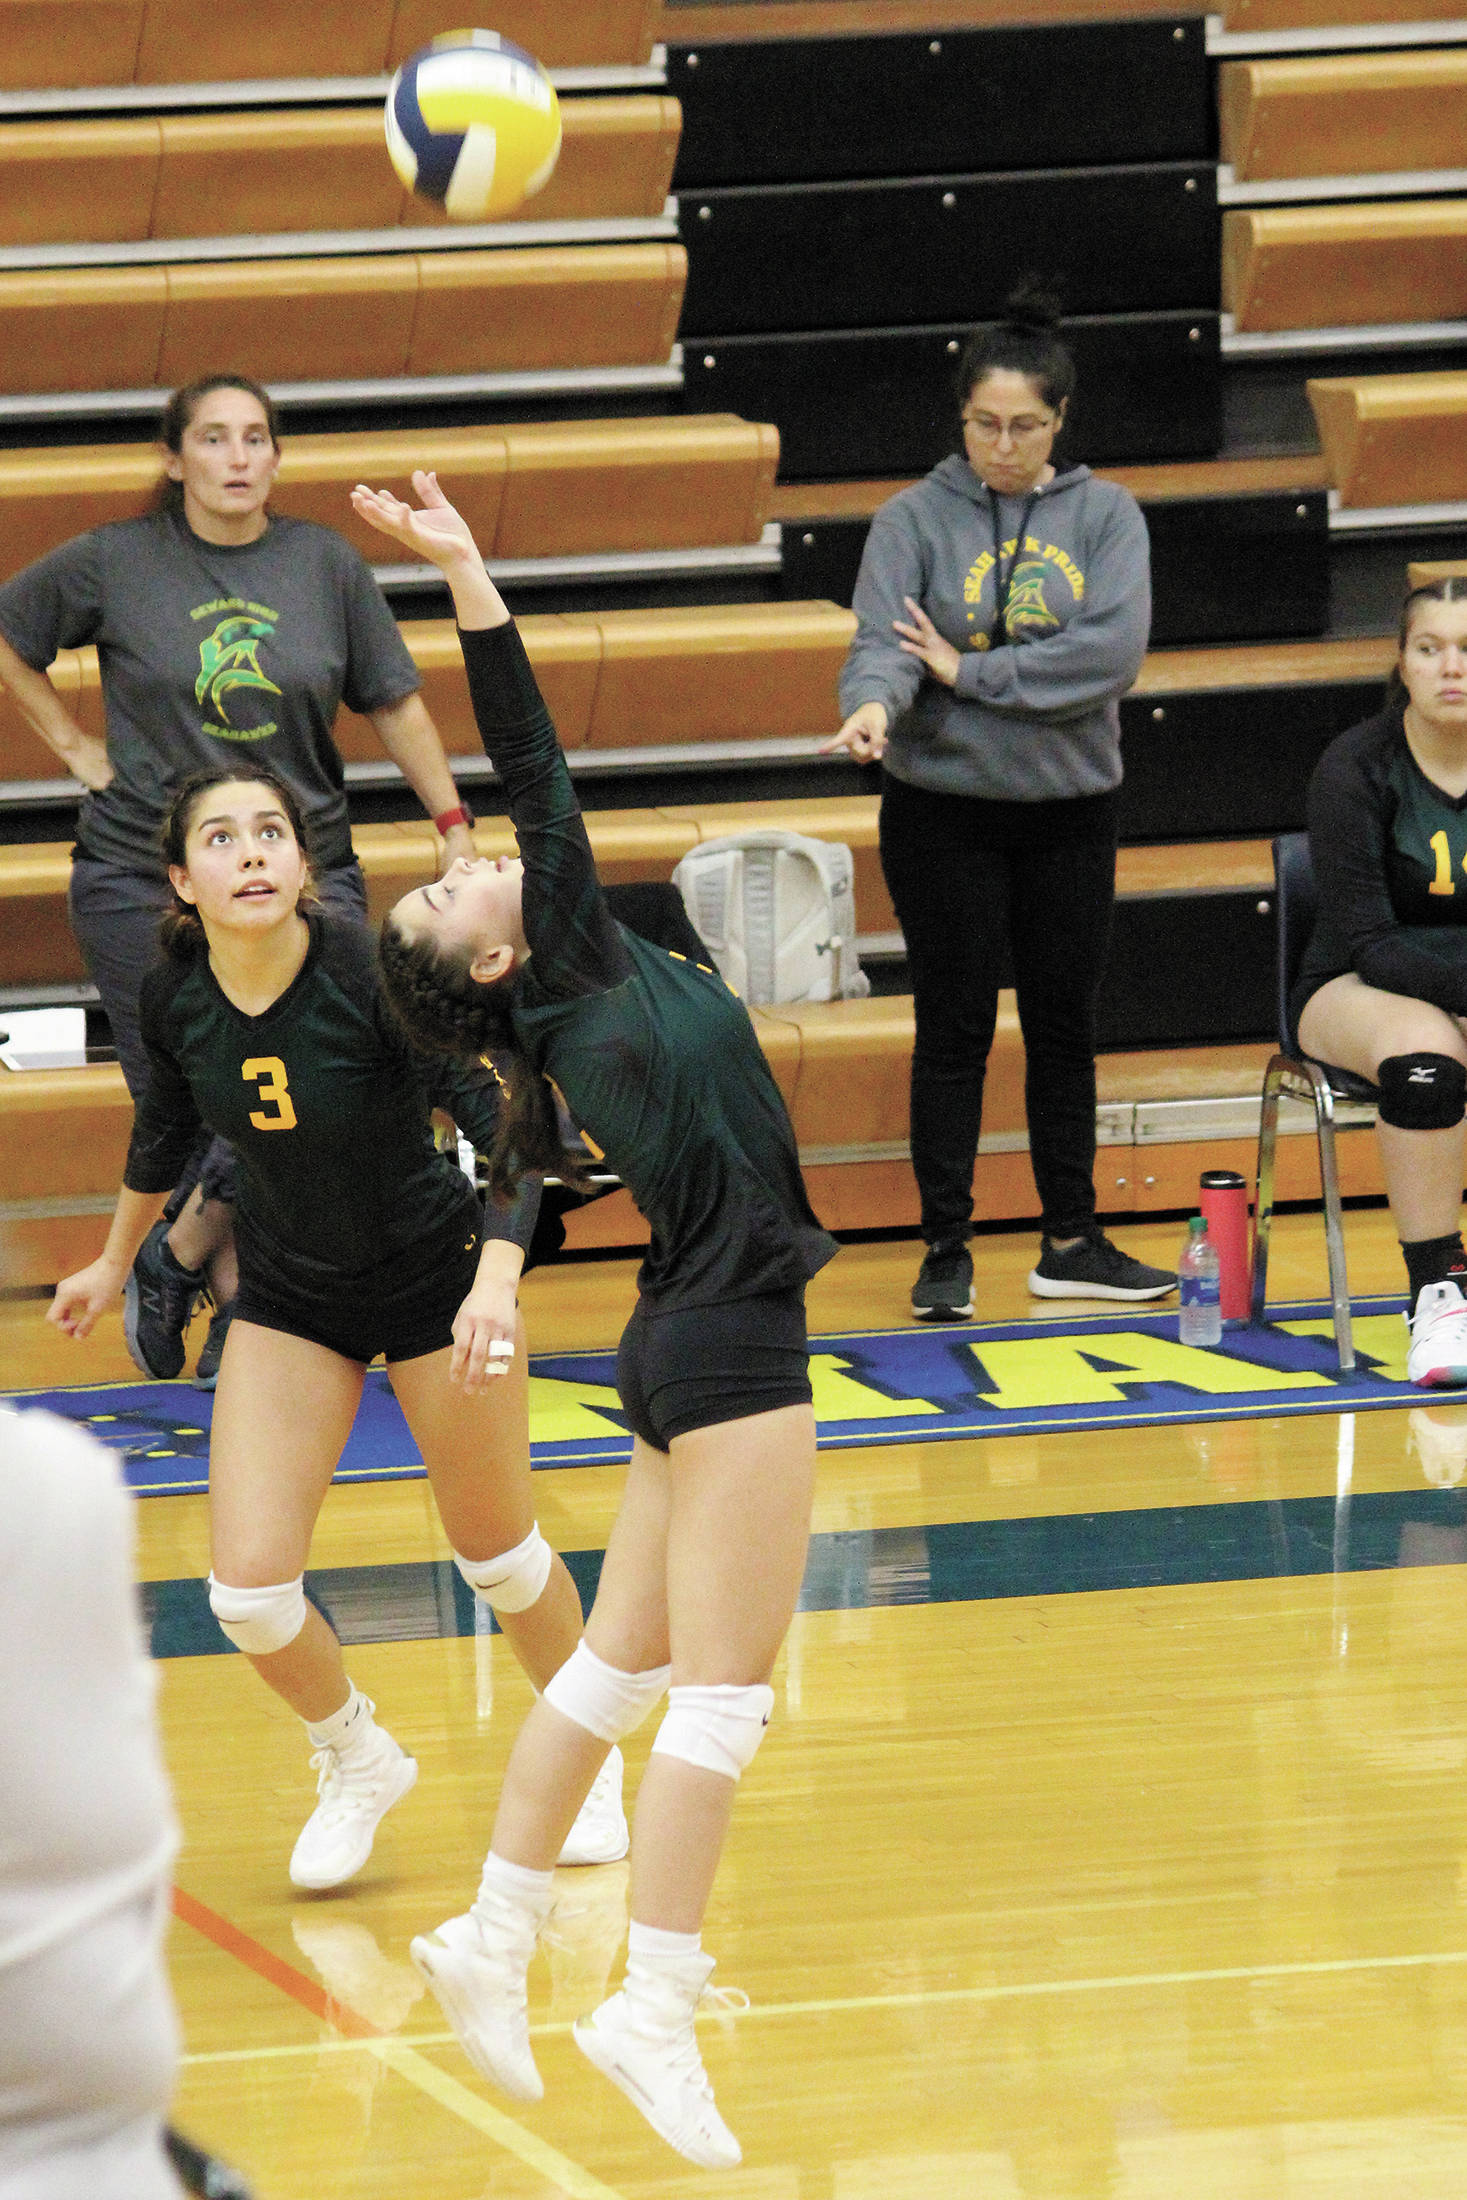 Seward’s Hannah Schilling sets the ball to teammate Gaia Casagranda (No. 3) during a Friday, Sept. 4, 2020 volleyball game against Homer High School in the Alice Witte Gymnasium in Homer, Alaska. (Photo by Megan Pacer/Homer News)